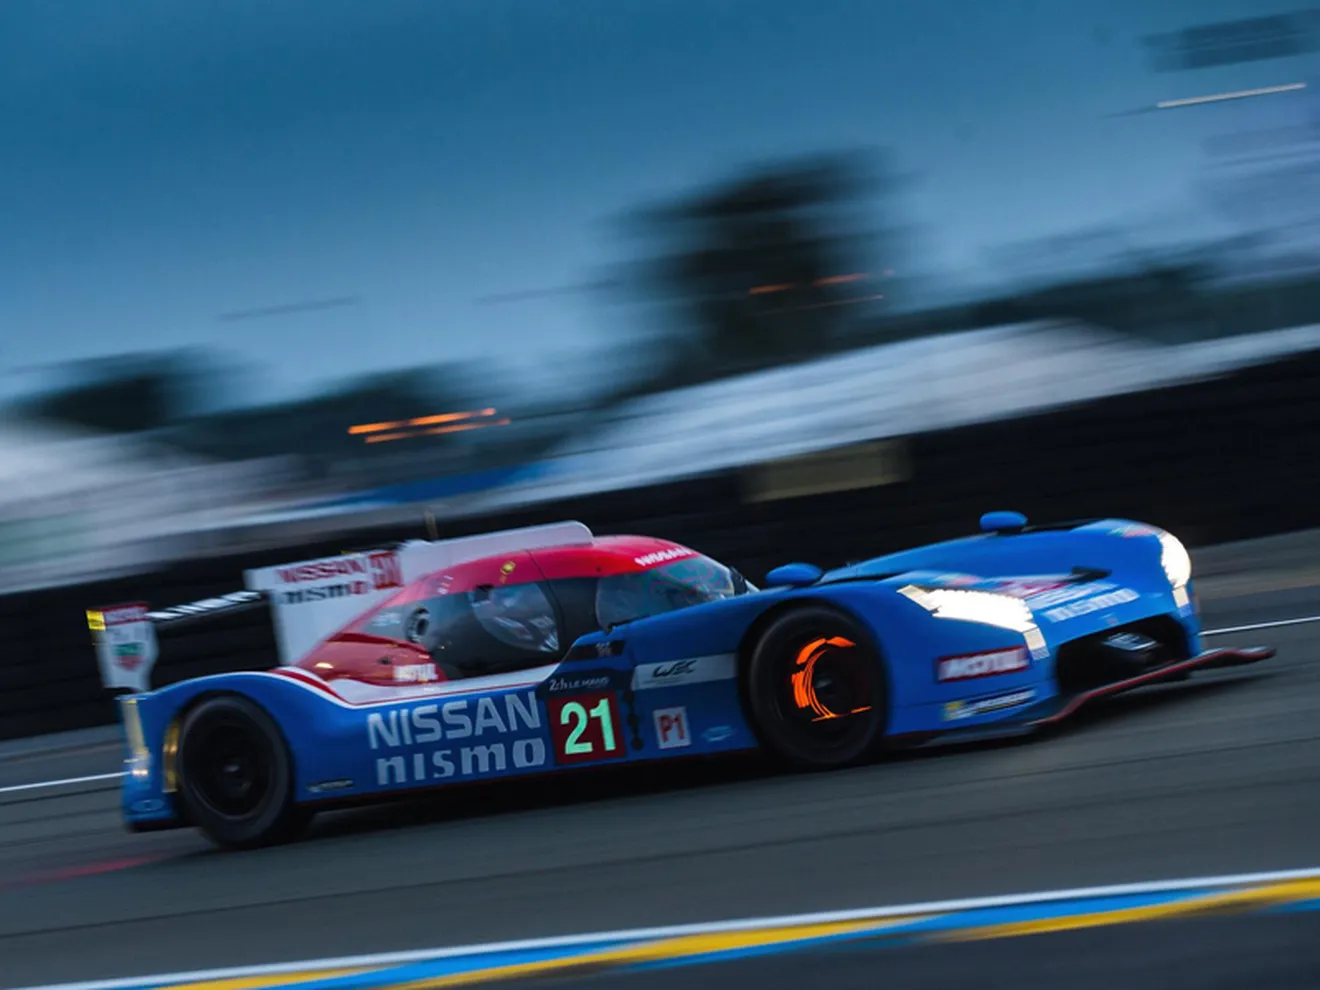 Amazon Prime estrena 'Le Mans: Racing is Everything'